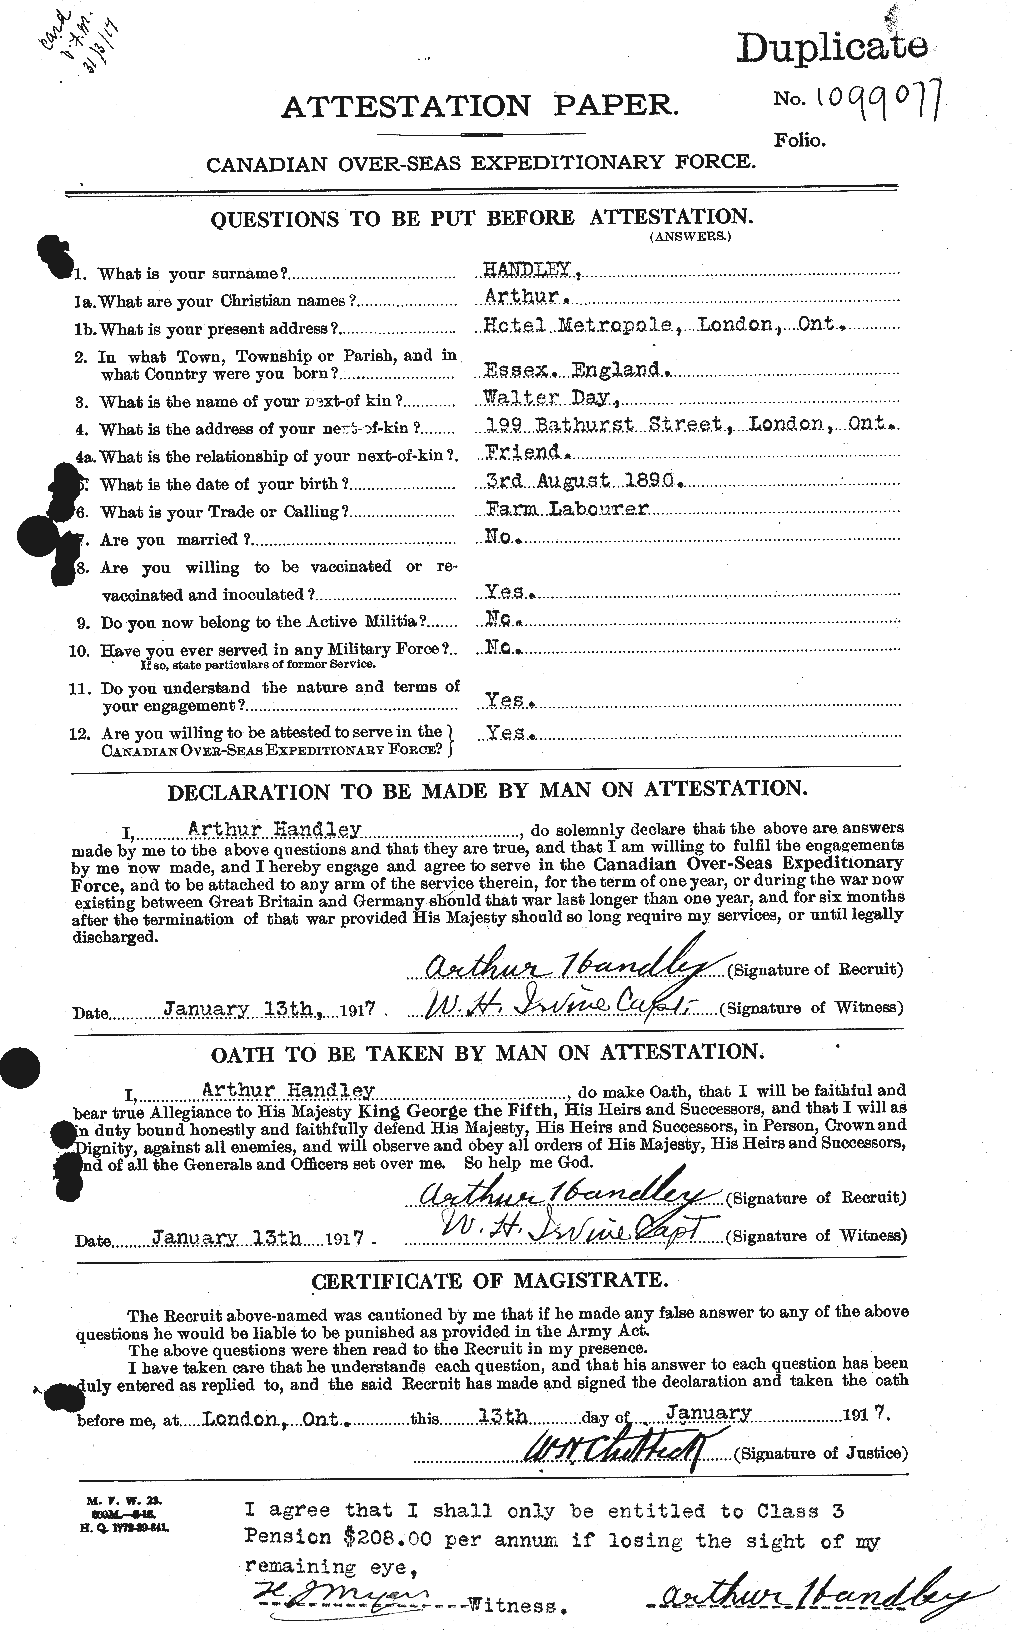 Personnel Records of the First World War - CEF 375640a